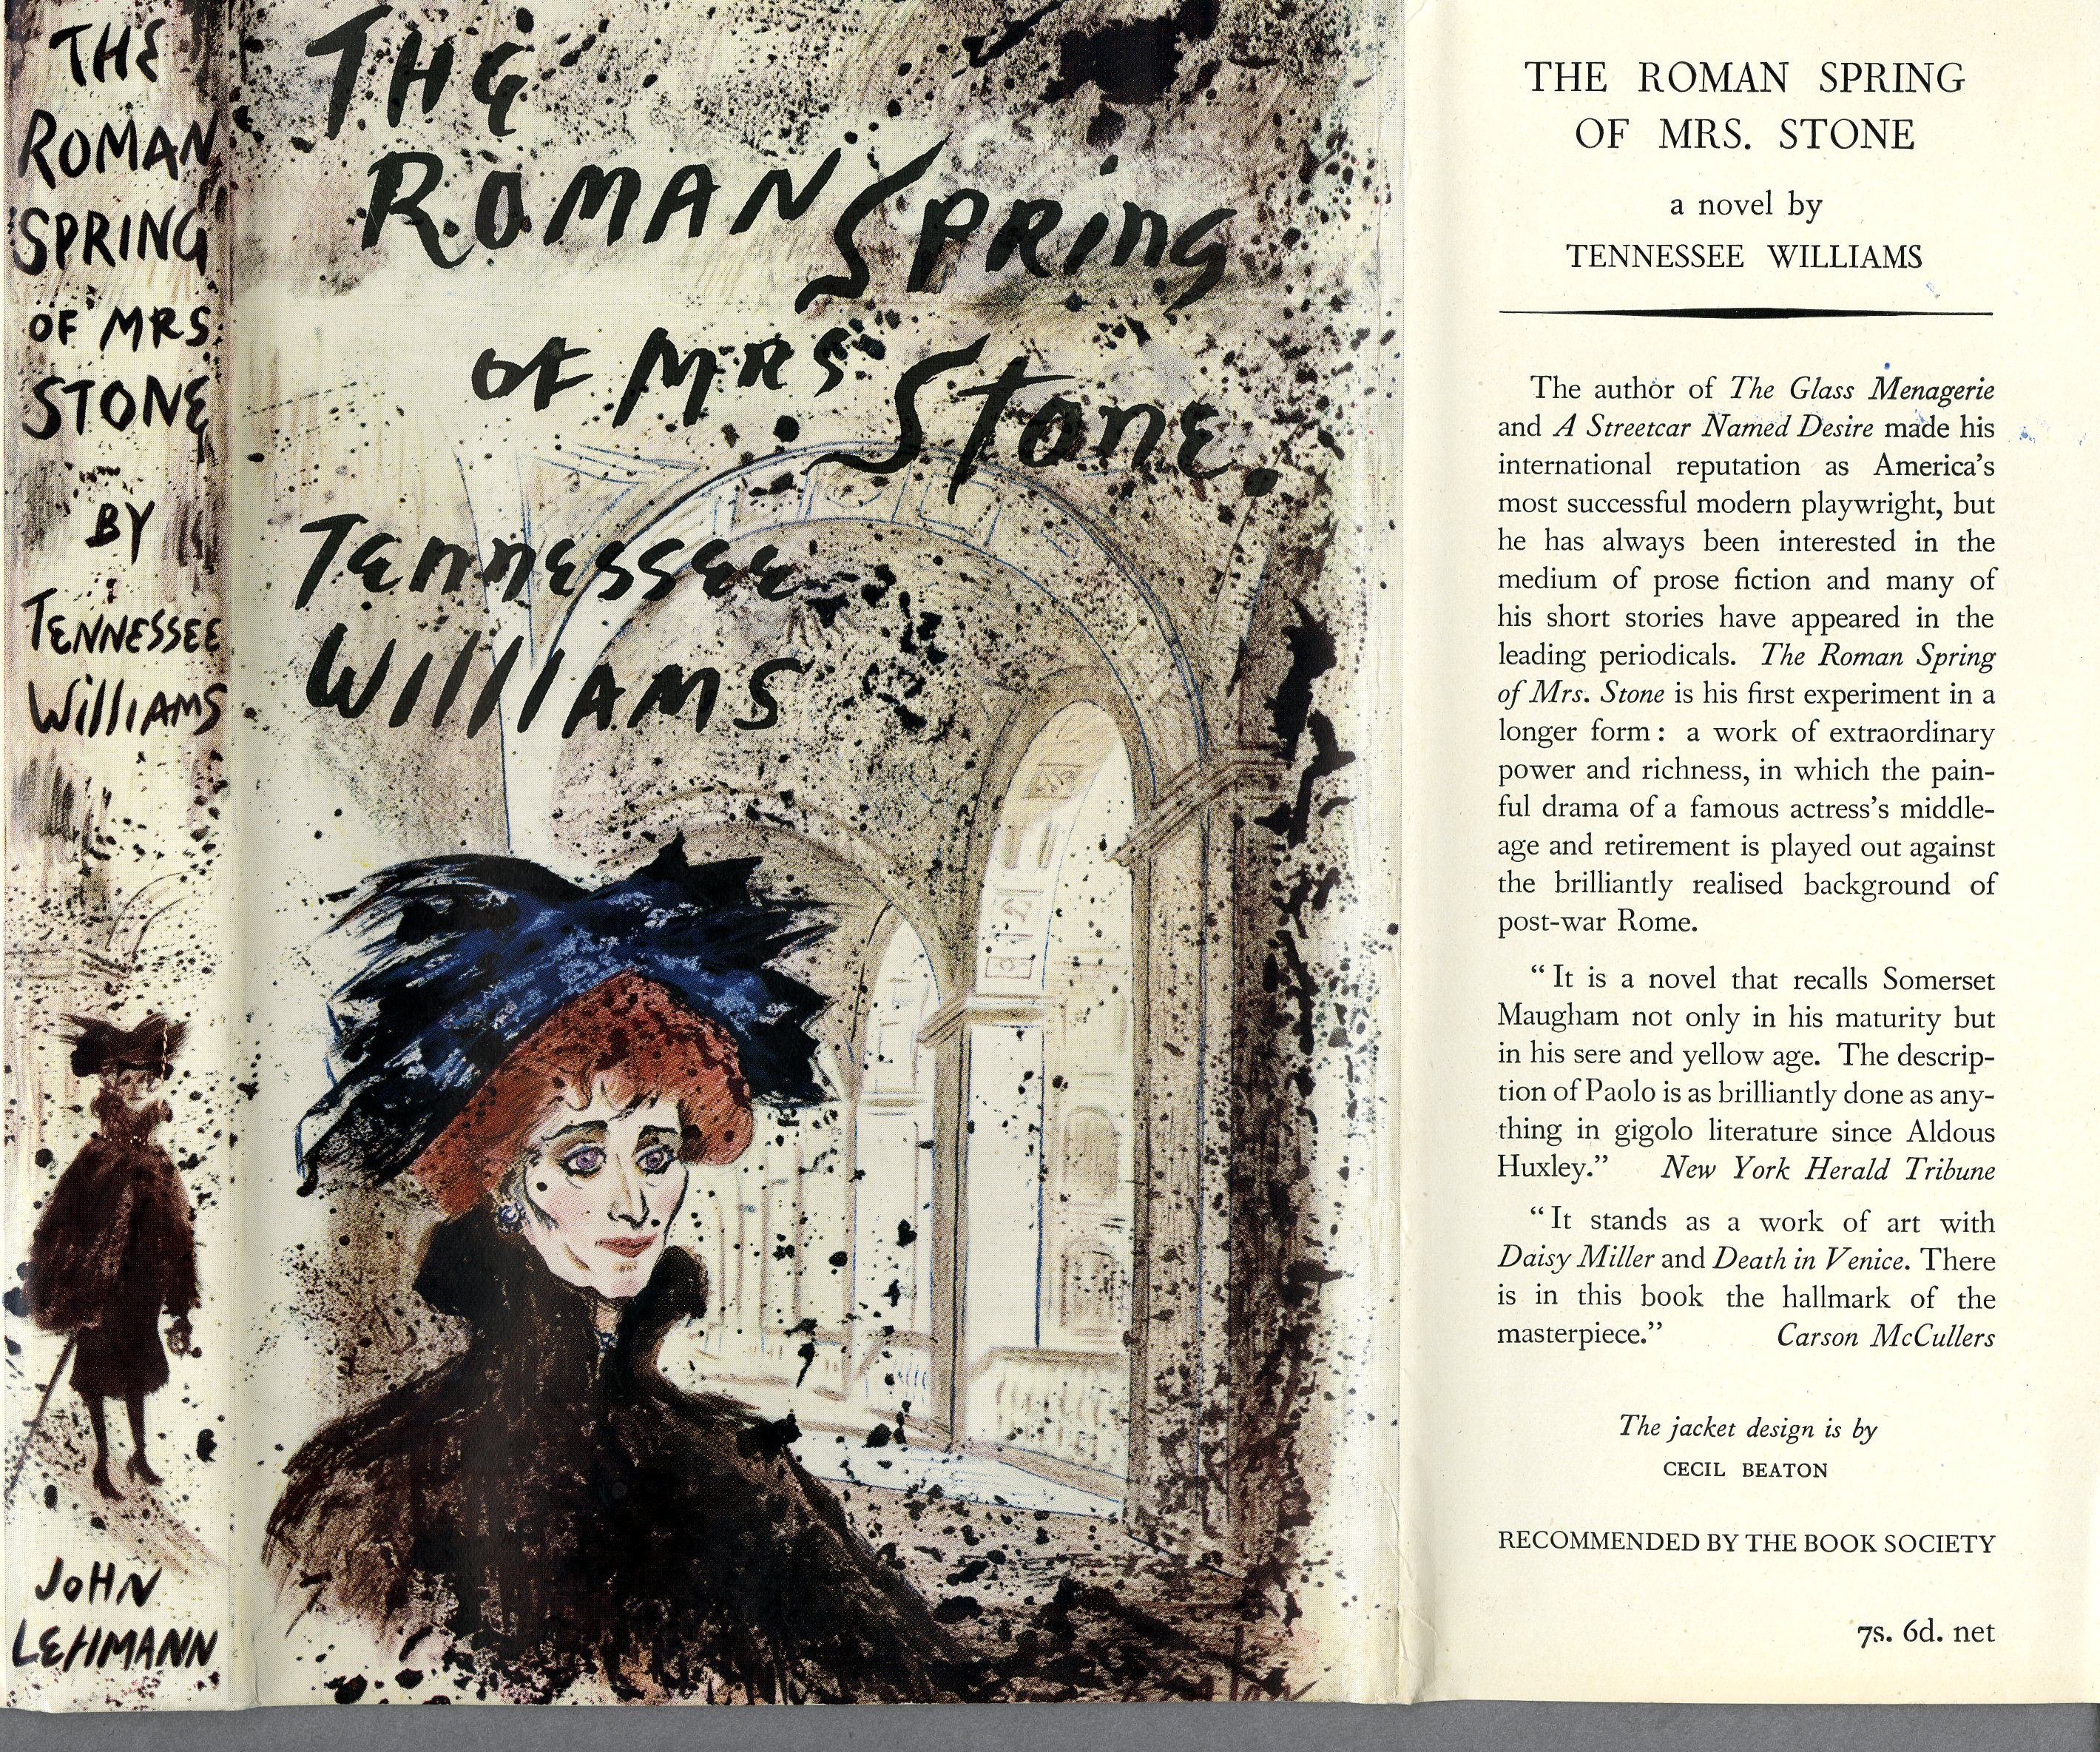 Williams, Tennessee. The Roman Spring of Mrs. Stone. London: J. Lehmann, 1950. Cover art and design by Cecil Beaton.